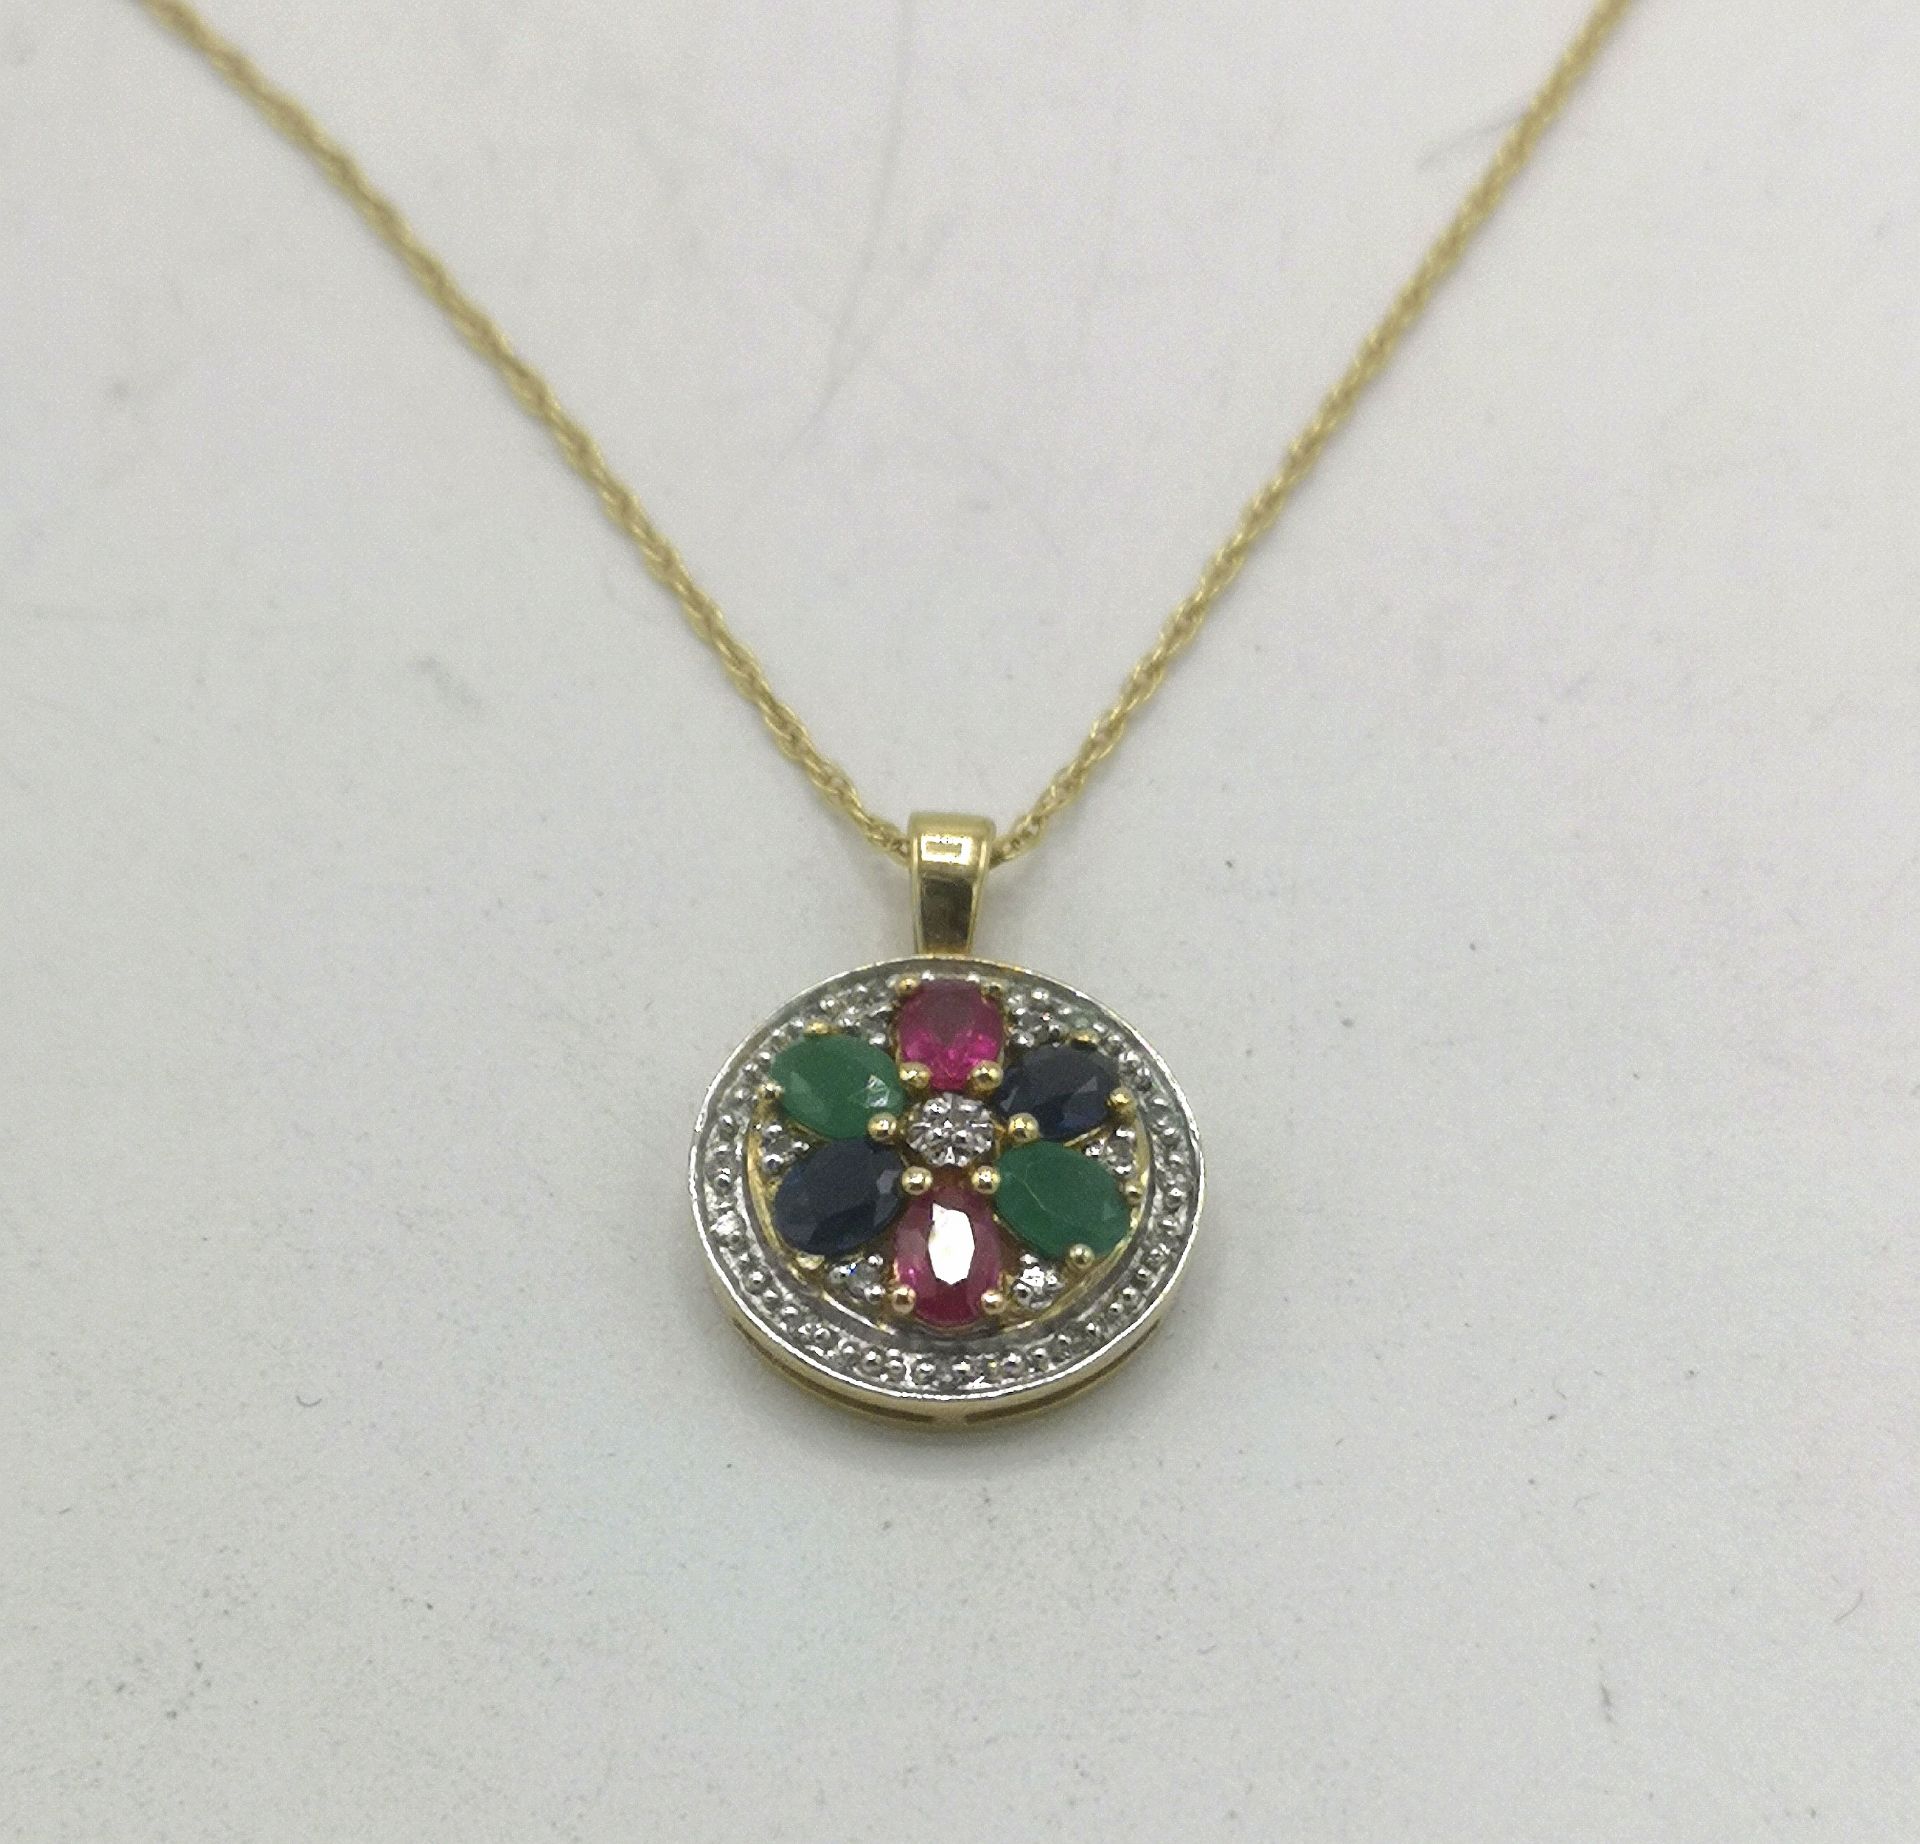 9ct gold pendant set with rubies, emeralds and sapphires - Image 4 of 8